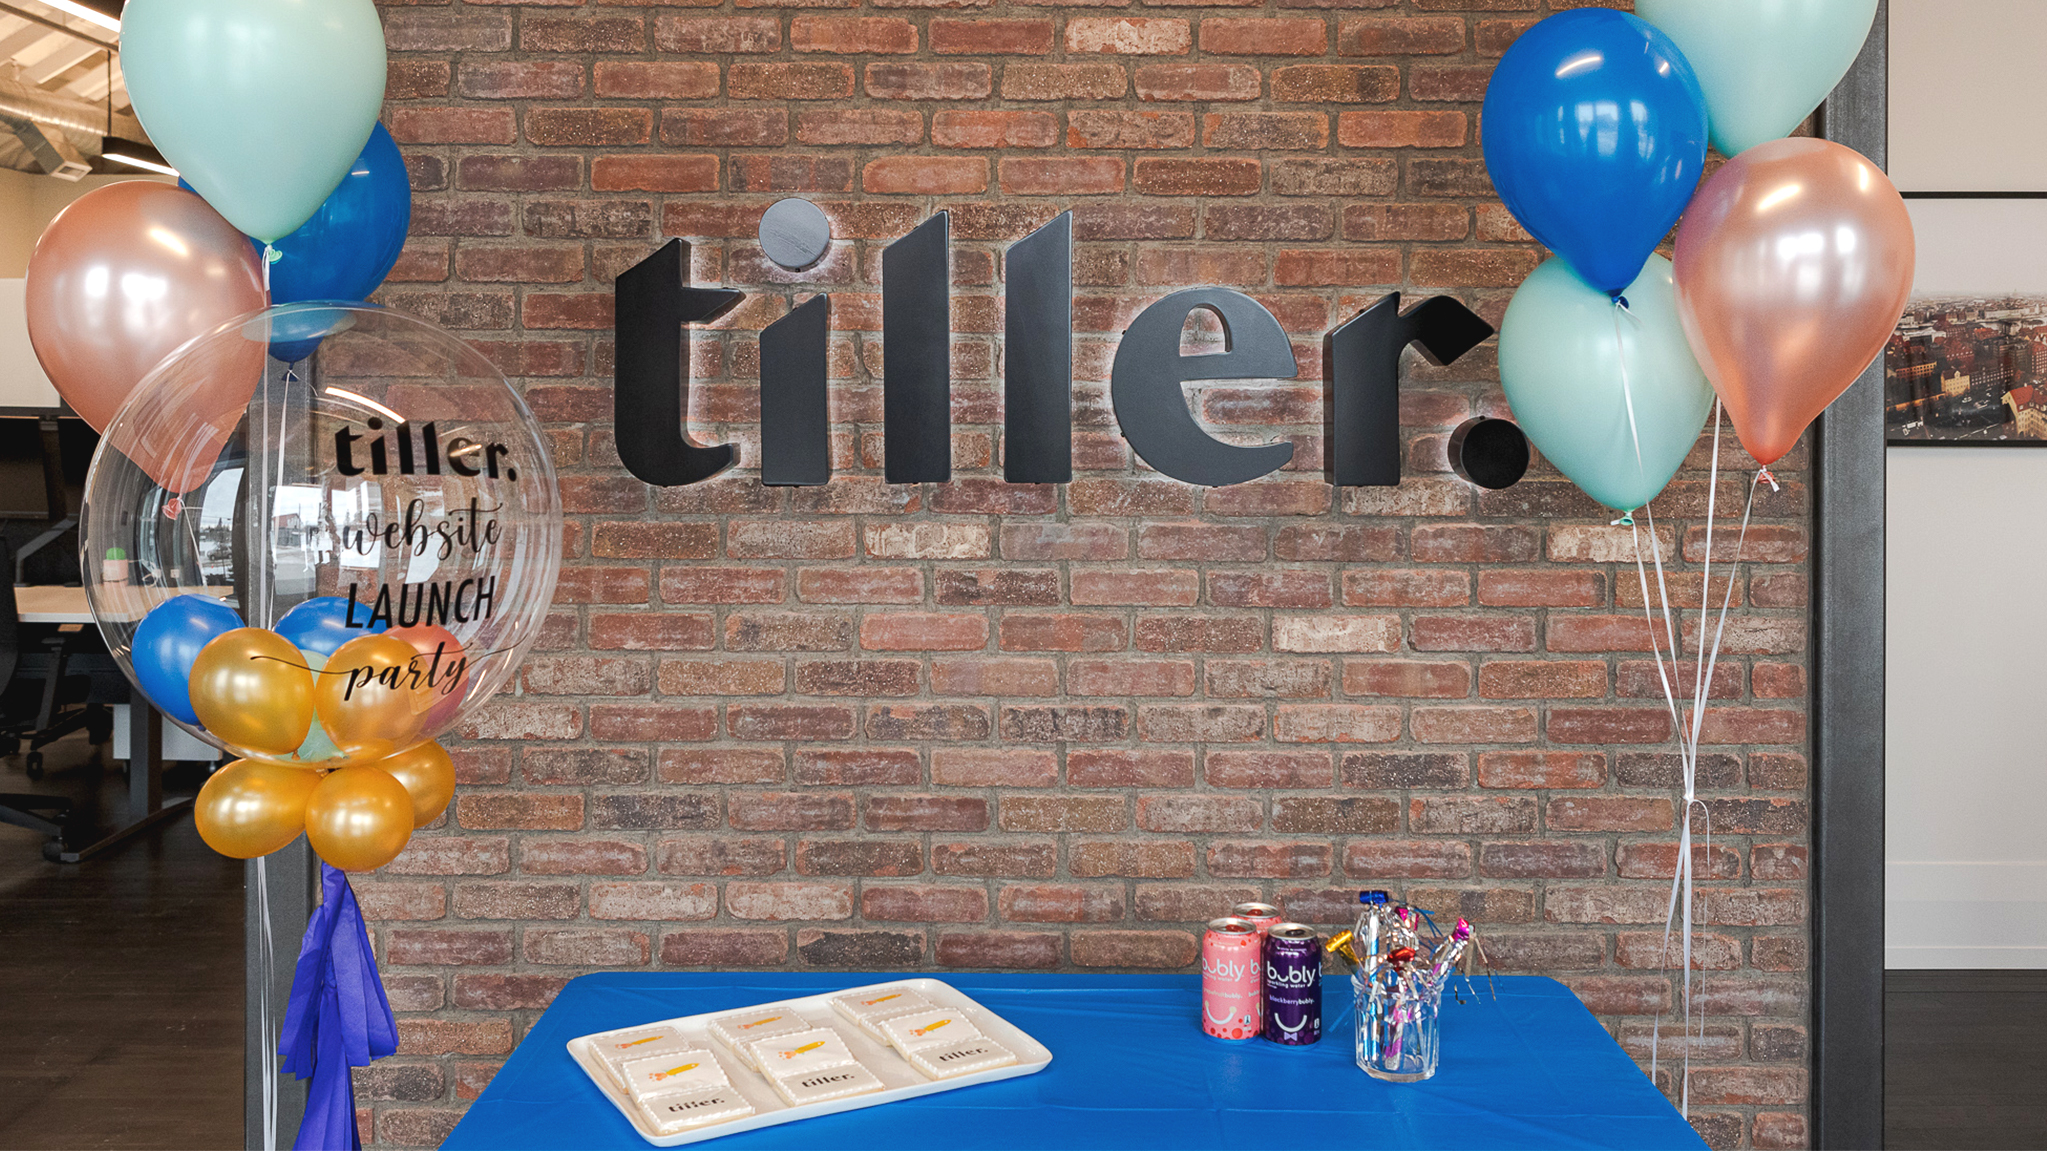 Picture of the Tiller website launch party with custom balloons and cookies.